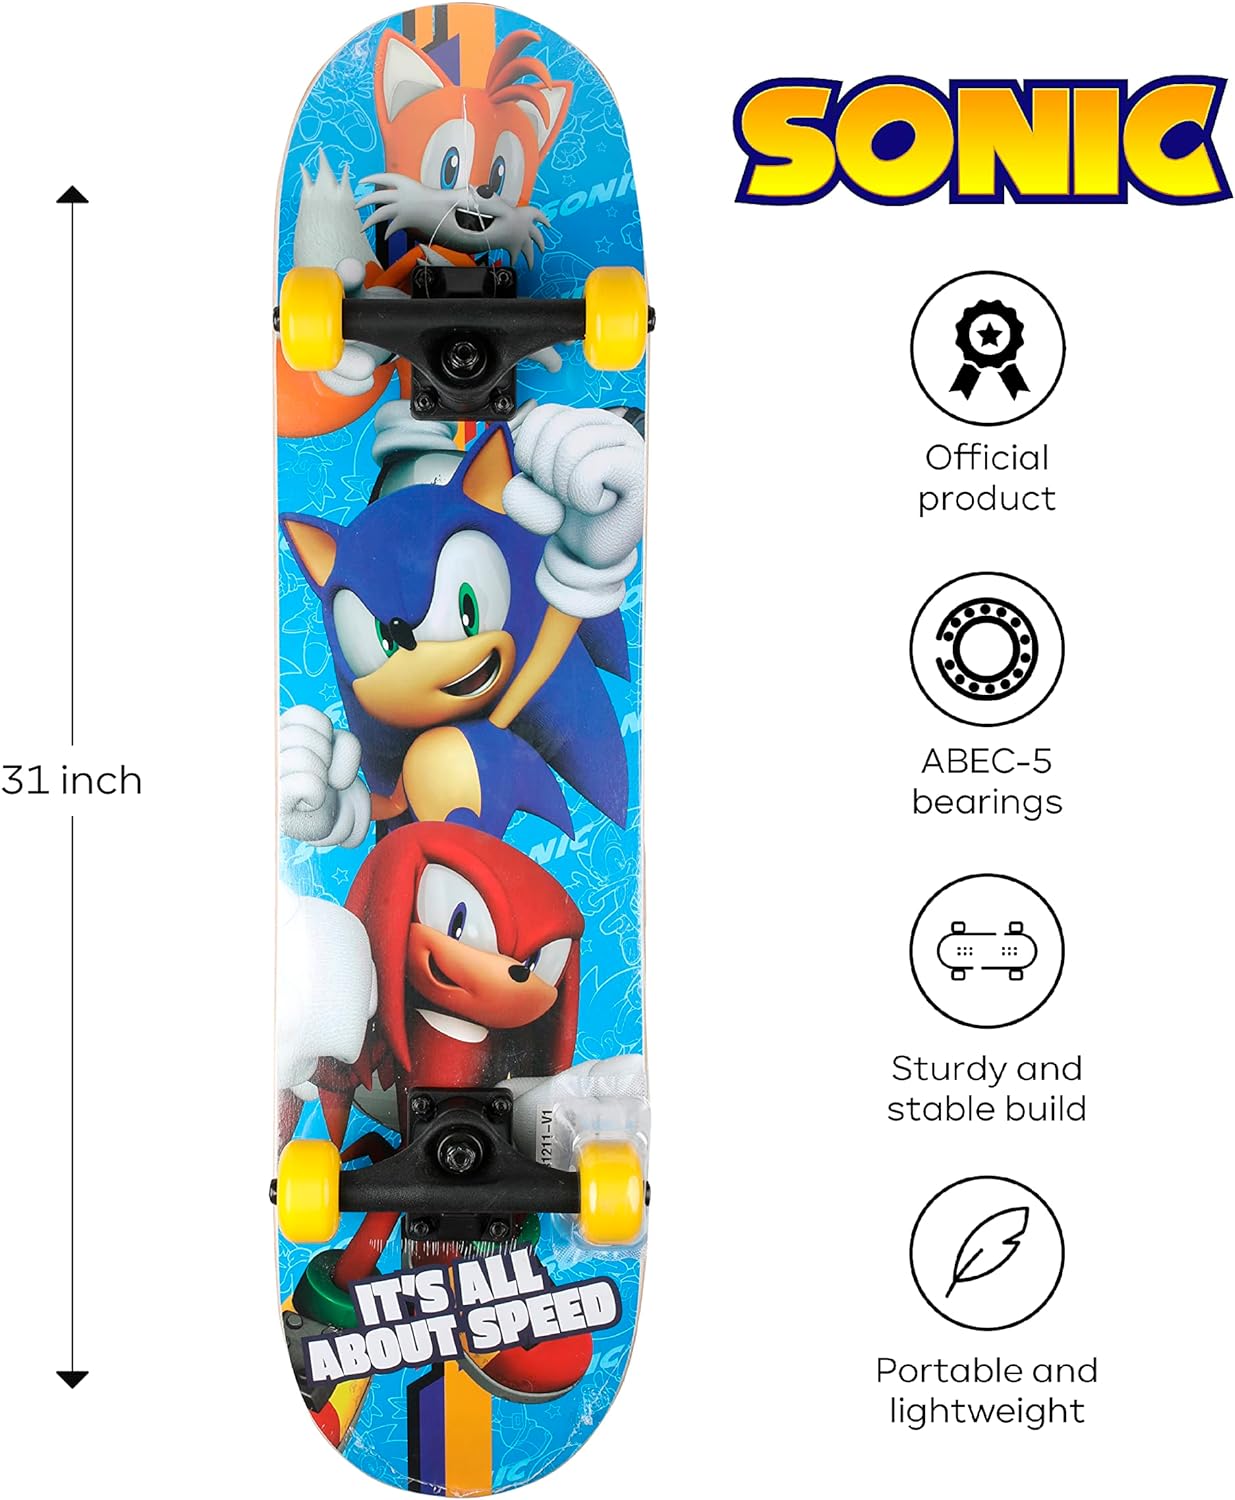 Sonic The Hedgehog Character Skateboards - Cruiser Skateboard with ABEC 5 Bearings, Durable Deck, Smooth Wheels (Choose from Sonic, Knuckles, Tails or Sonic & Friends)